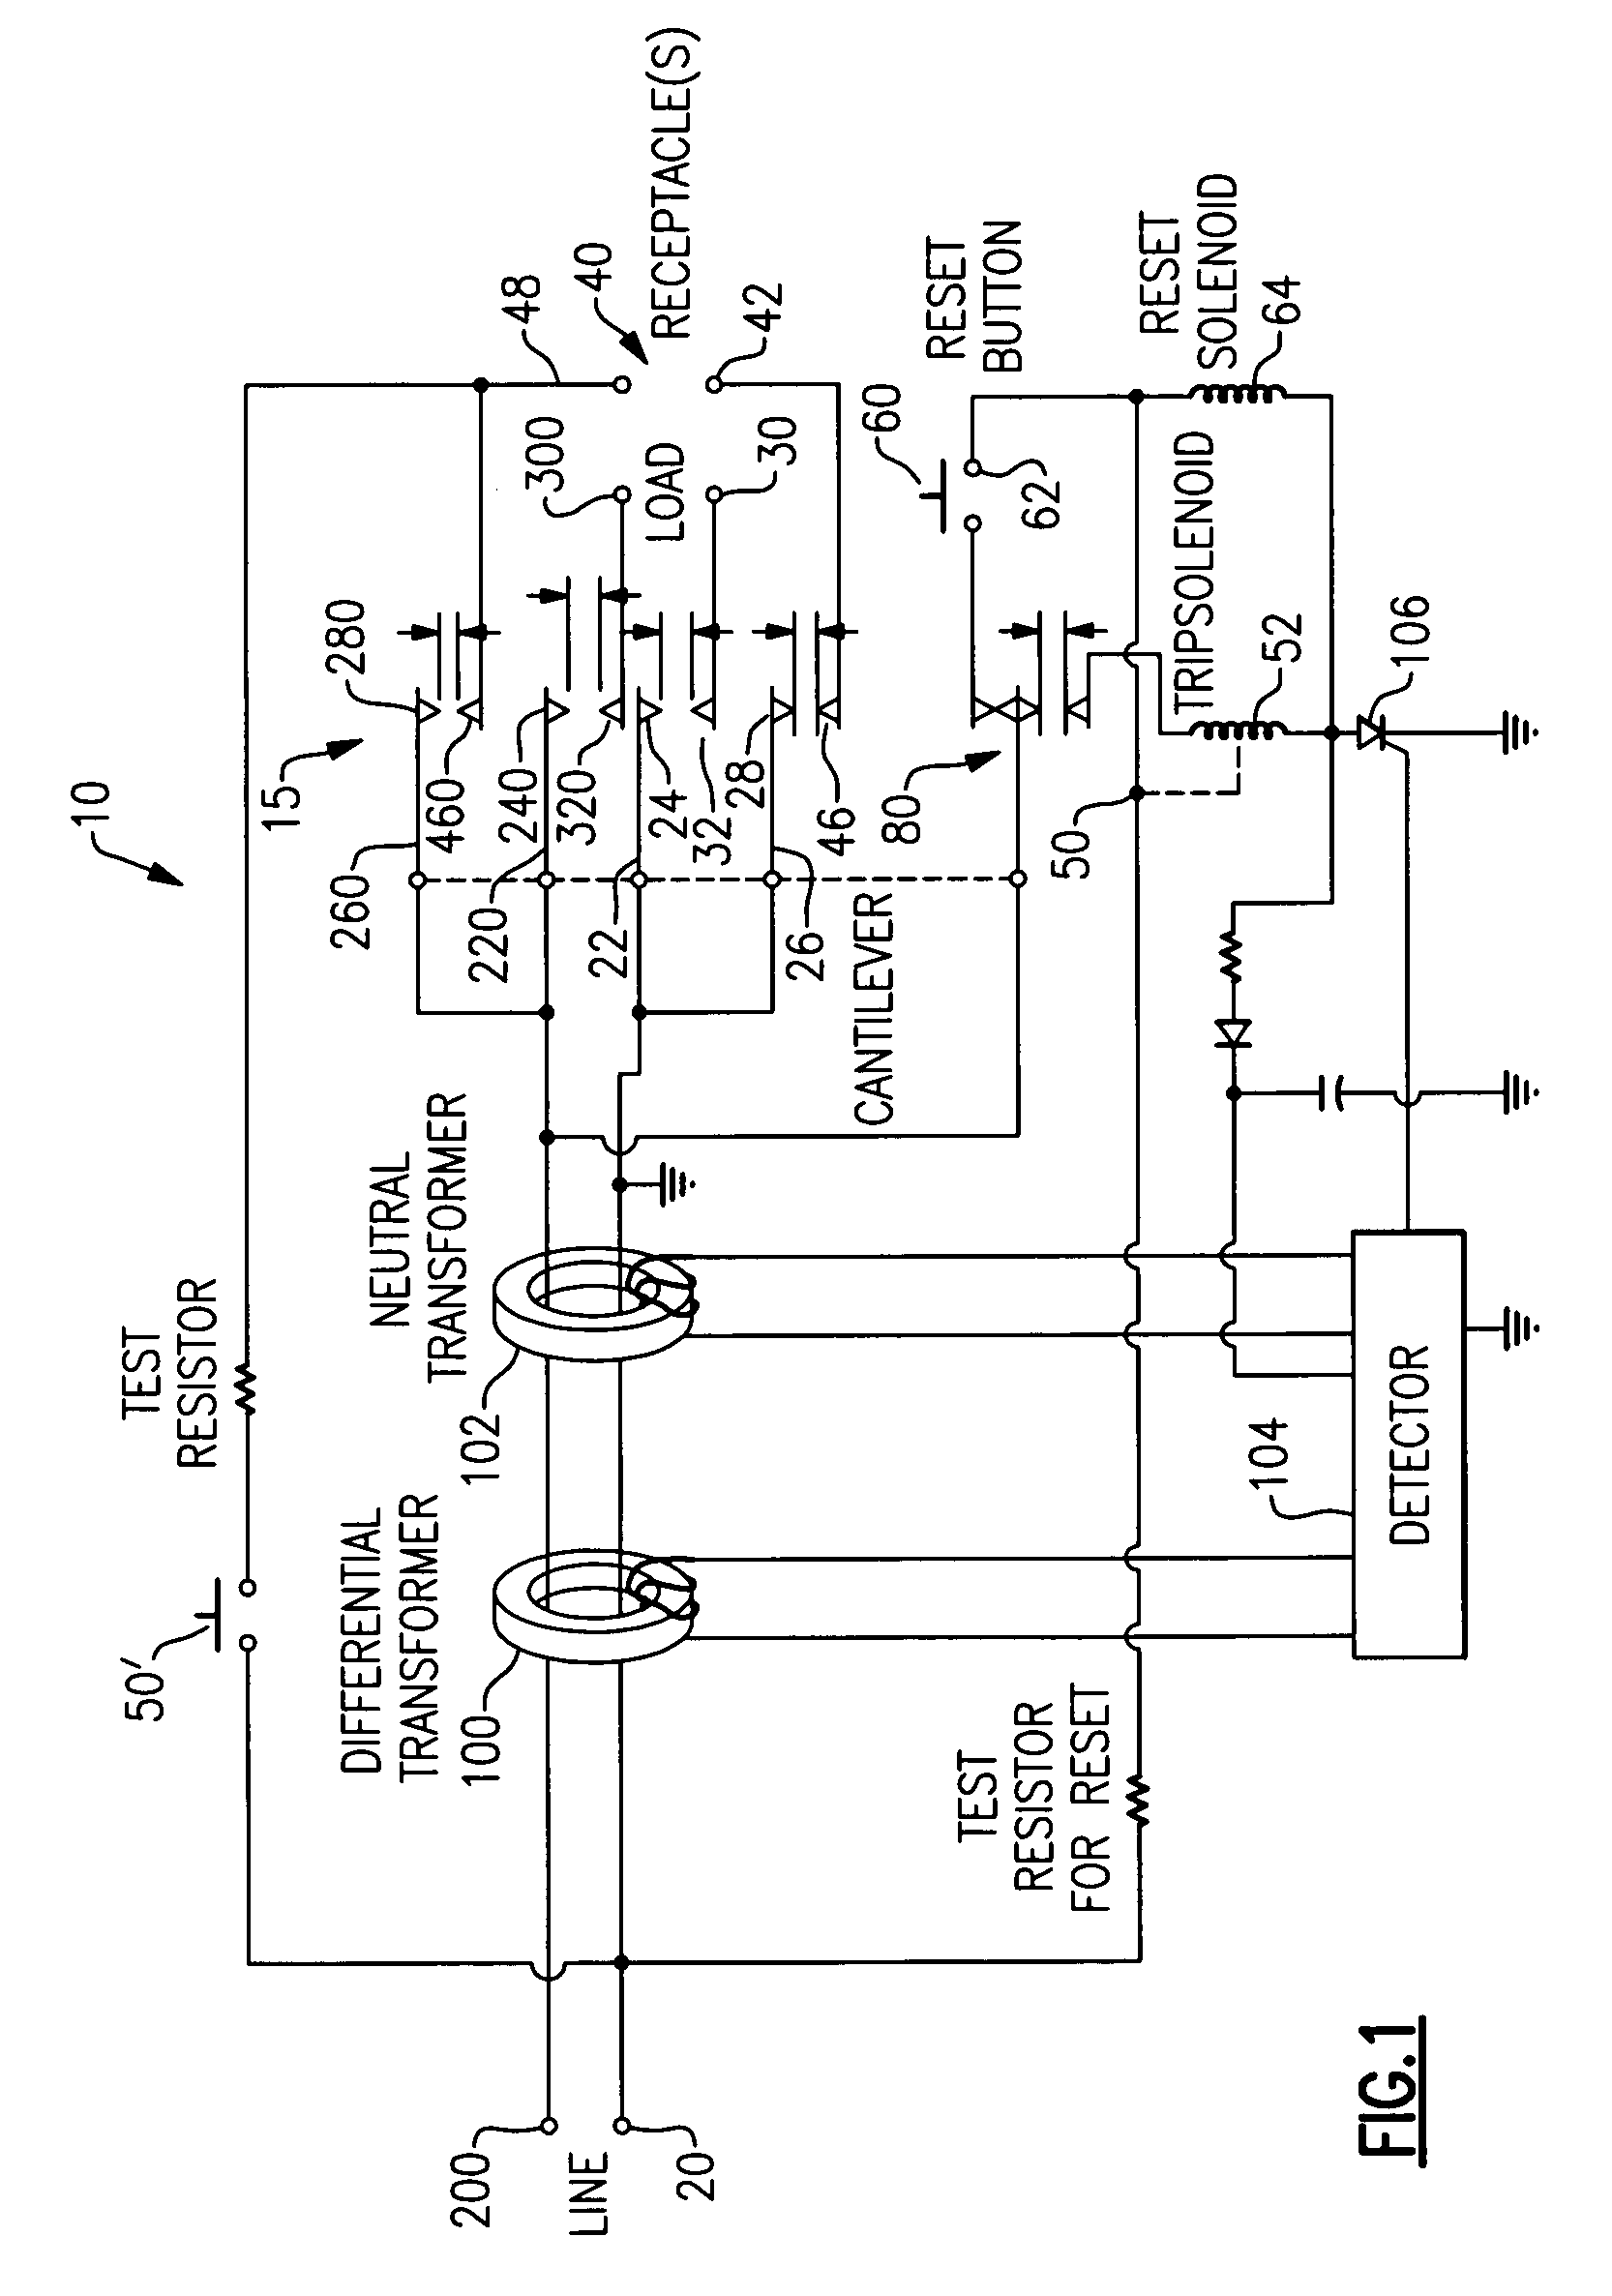 Protection device with a contact breaker mechanism